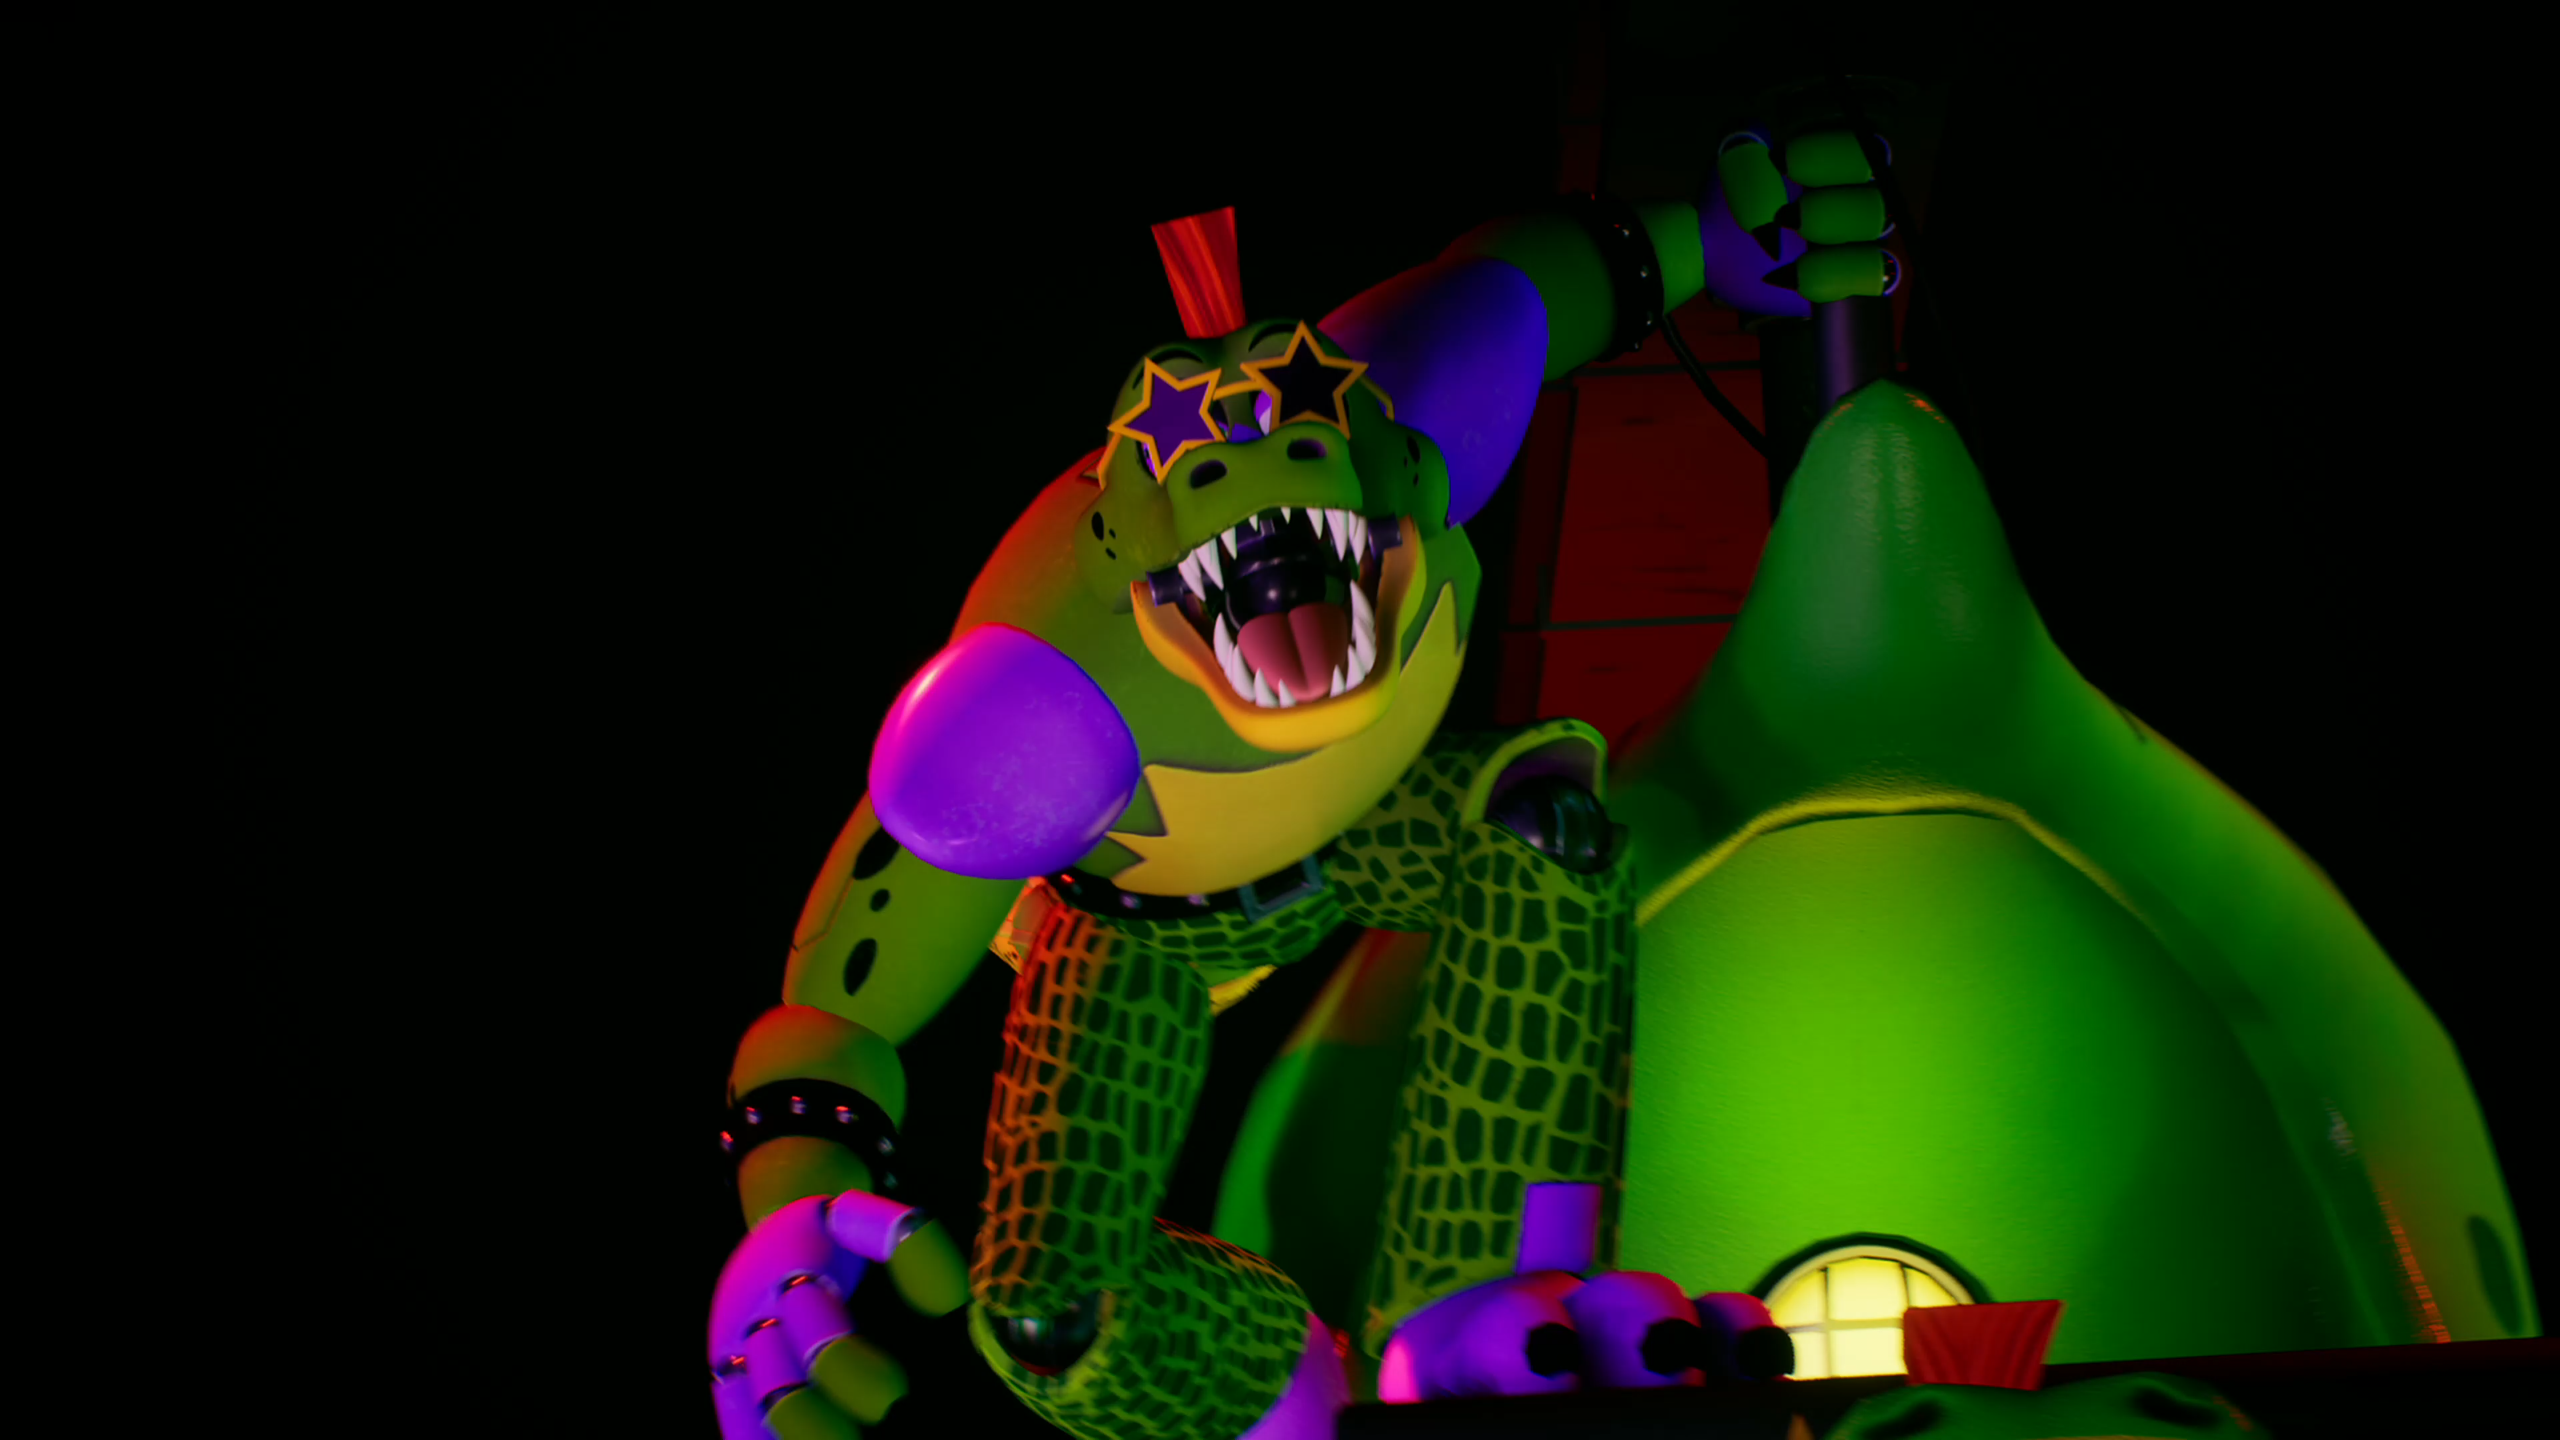 Playing as Roxy to hunt Gregory - Five Nights at Freddy's